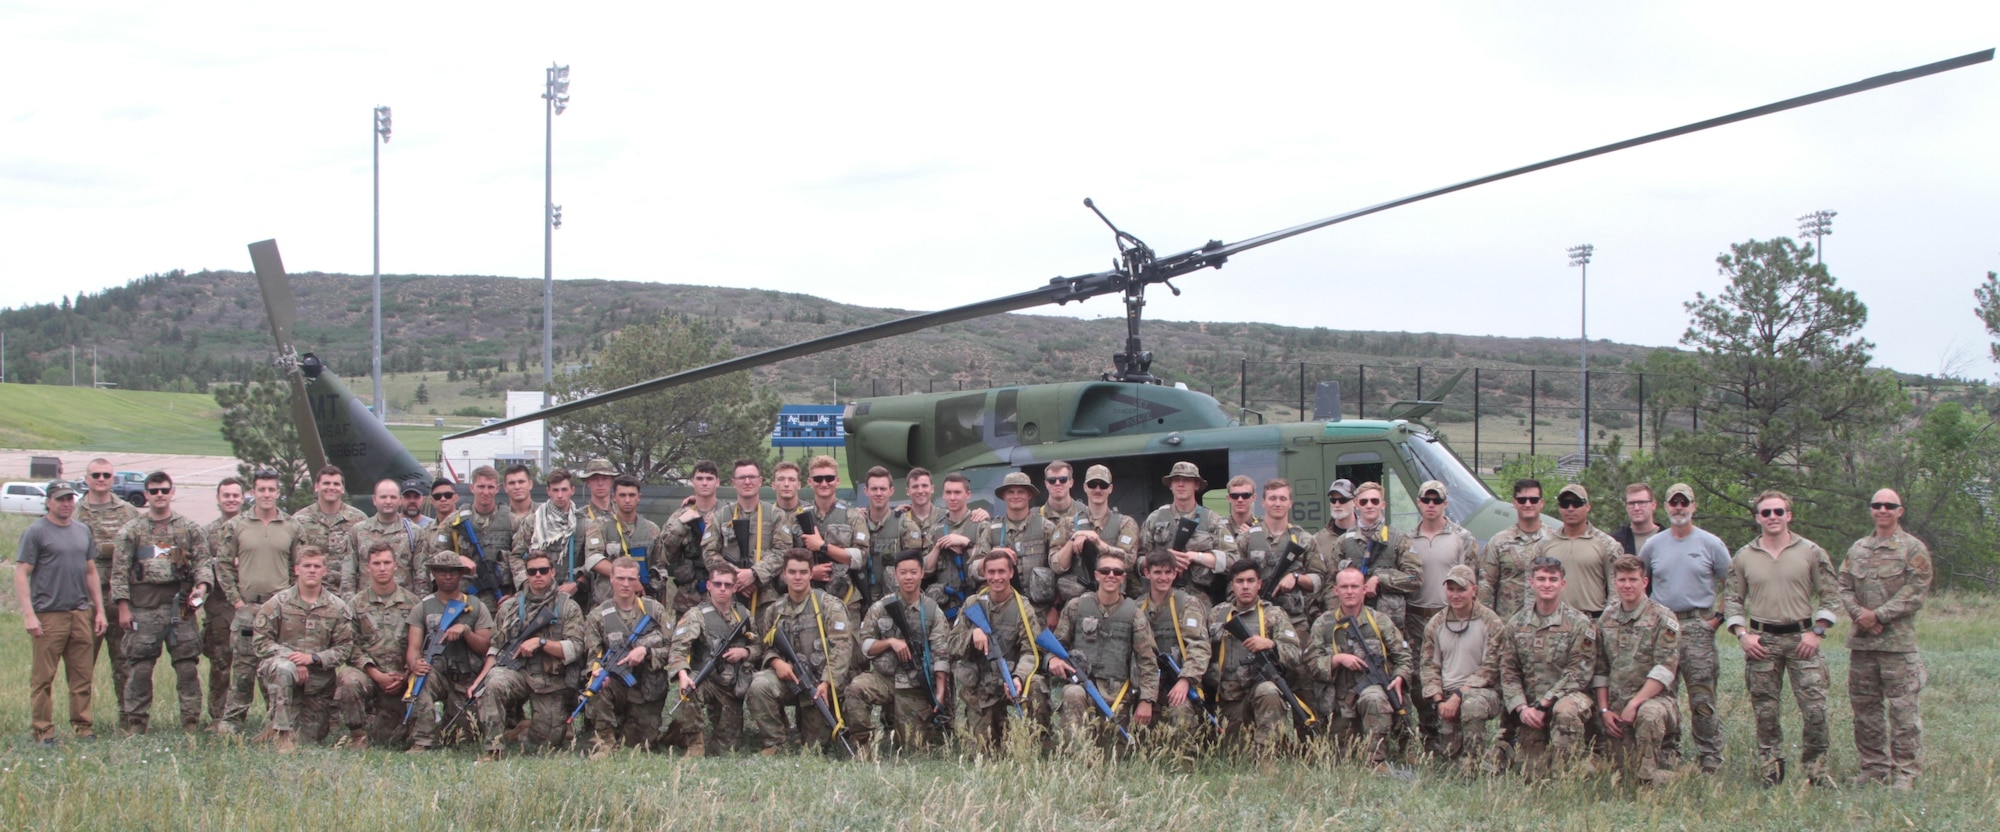 Cadets and instructors from the second of two Special Warfare Operations Courses pose for a photograph at the U.S. Air Force Academy, Colorado., June 30, 2022. In all, 61 Air Force ROTC and Air Force Academy cadets participated in the summer courses to prepare them to be special warfare officers. (U.S. Air Force Academy courtesy photo)